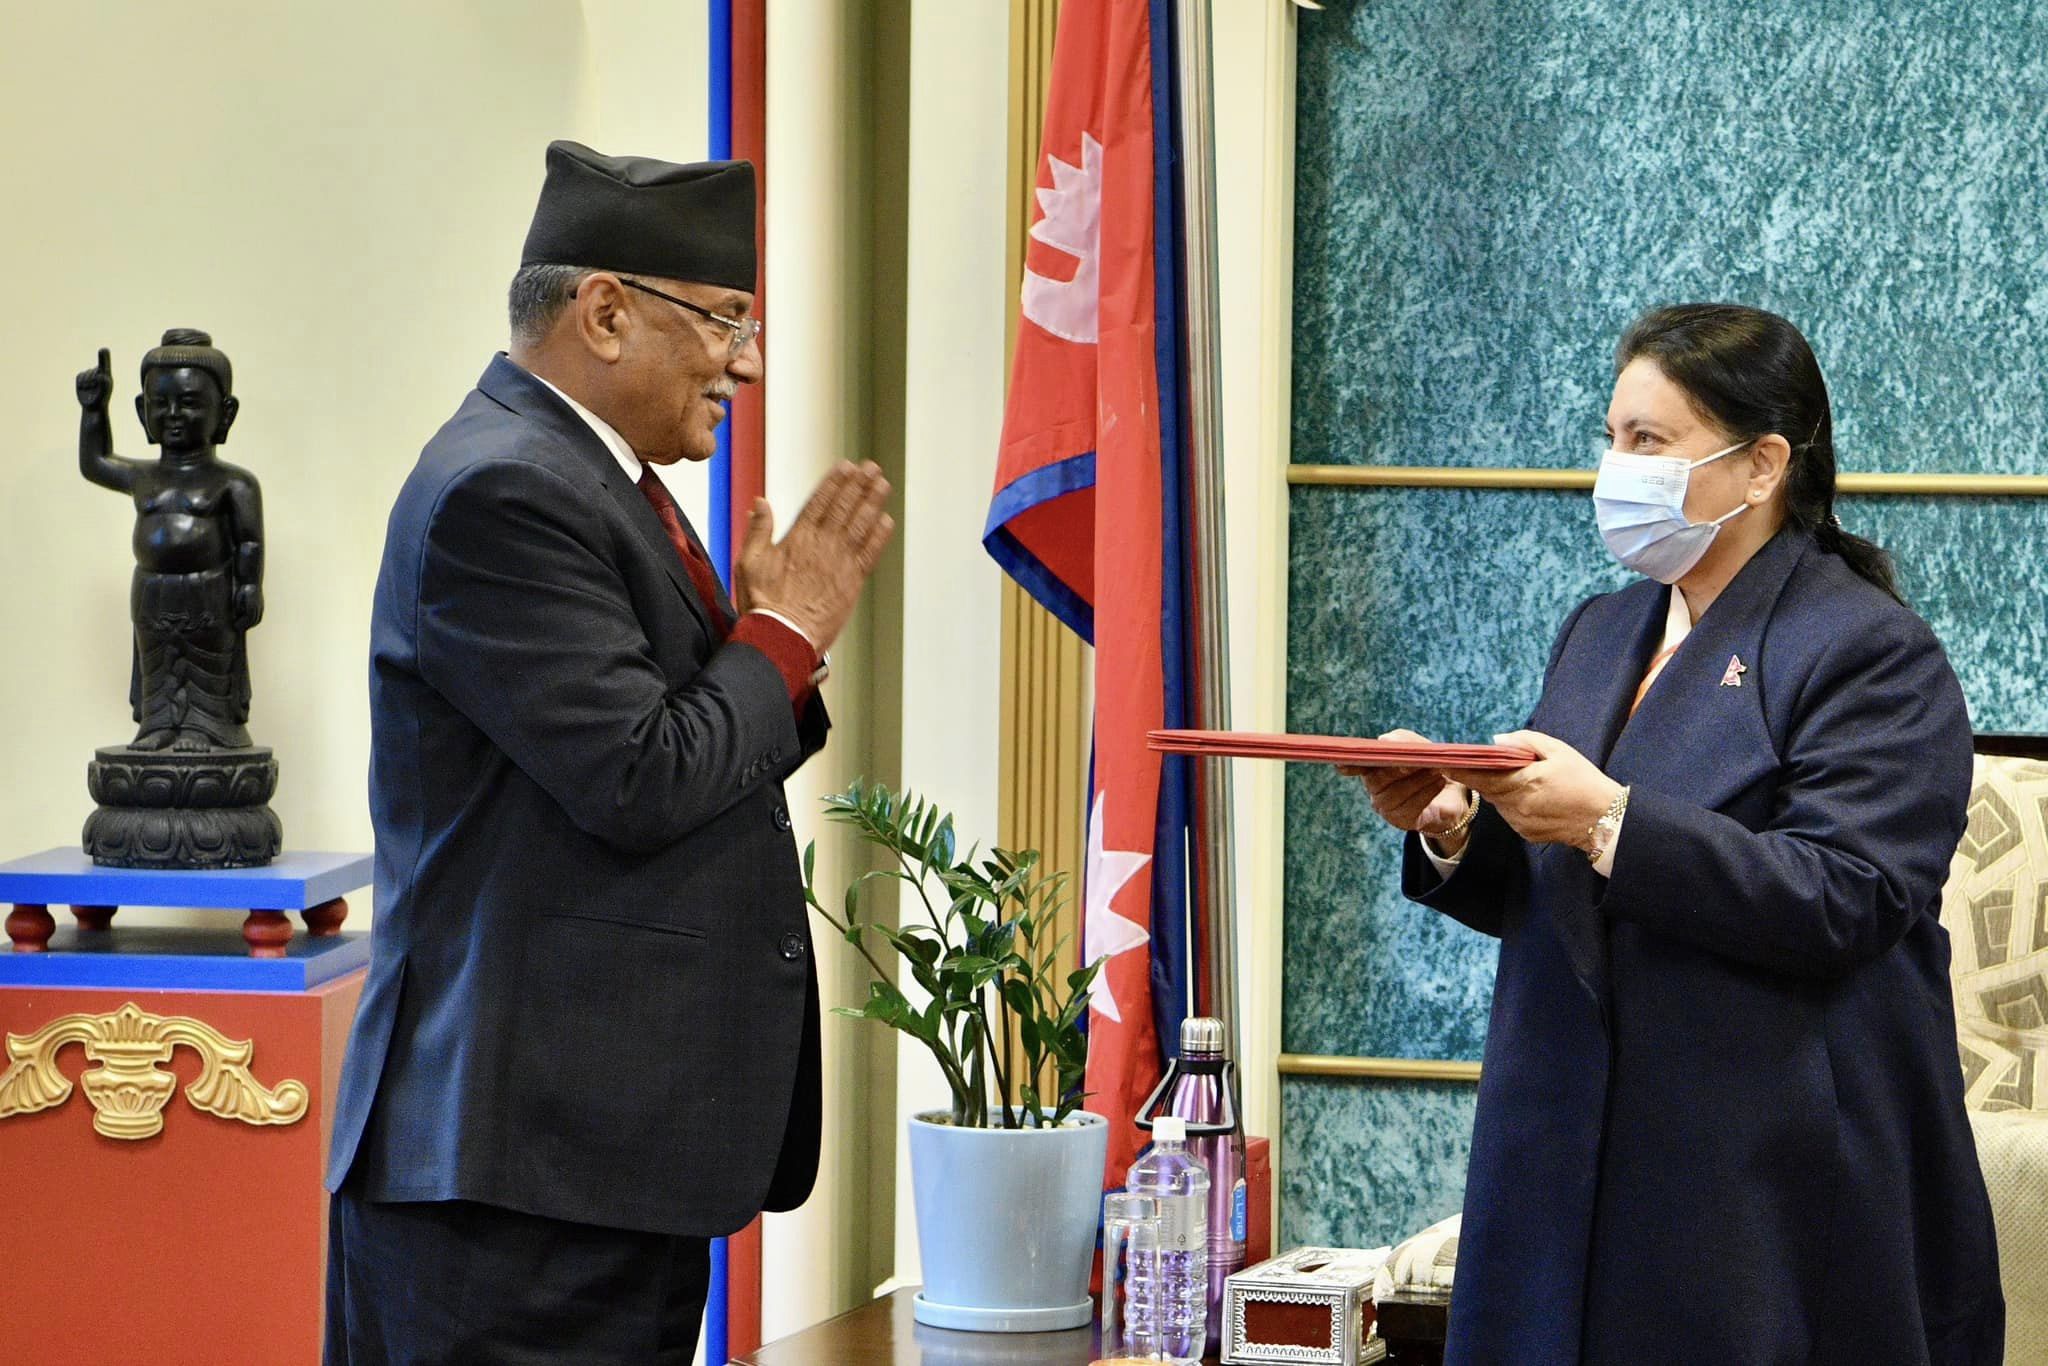 Nepal’s too-quick high-voltage political drama